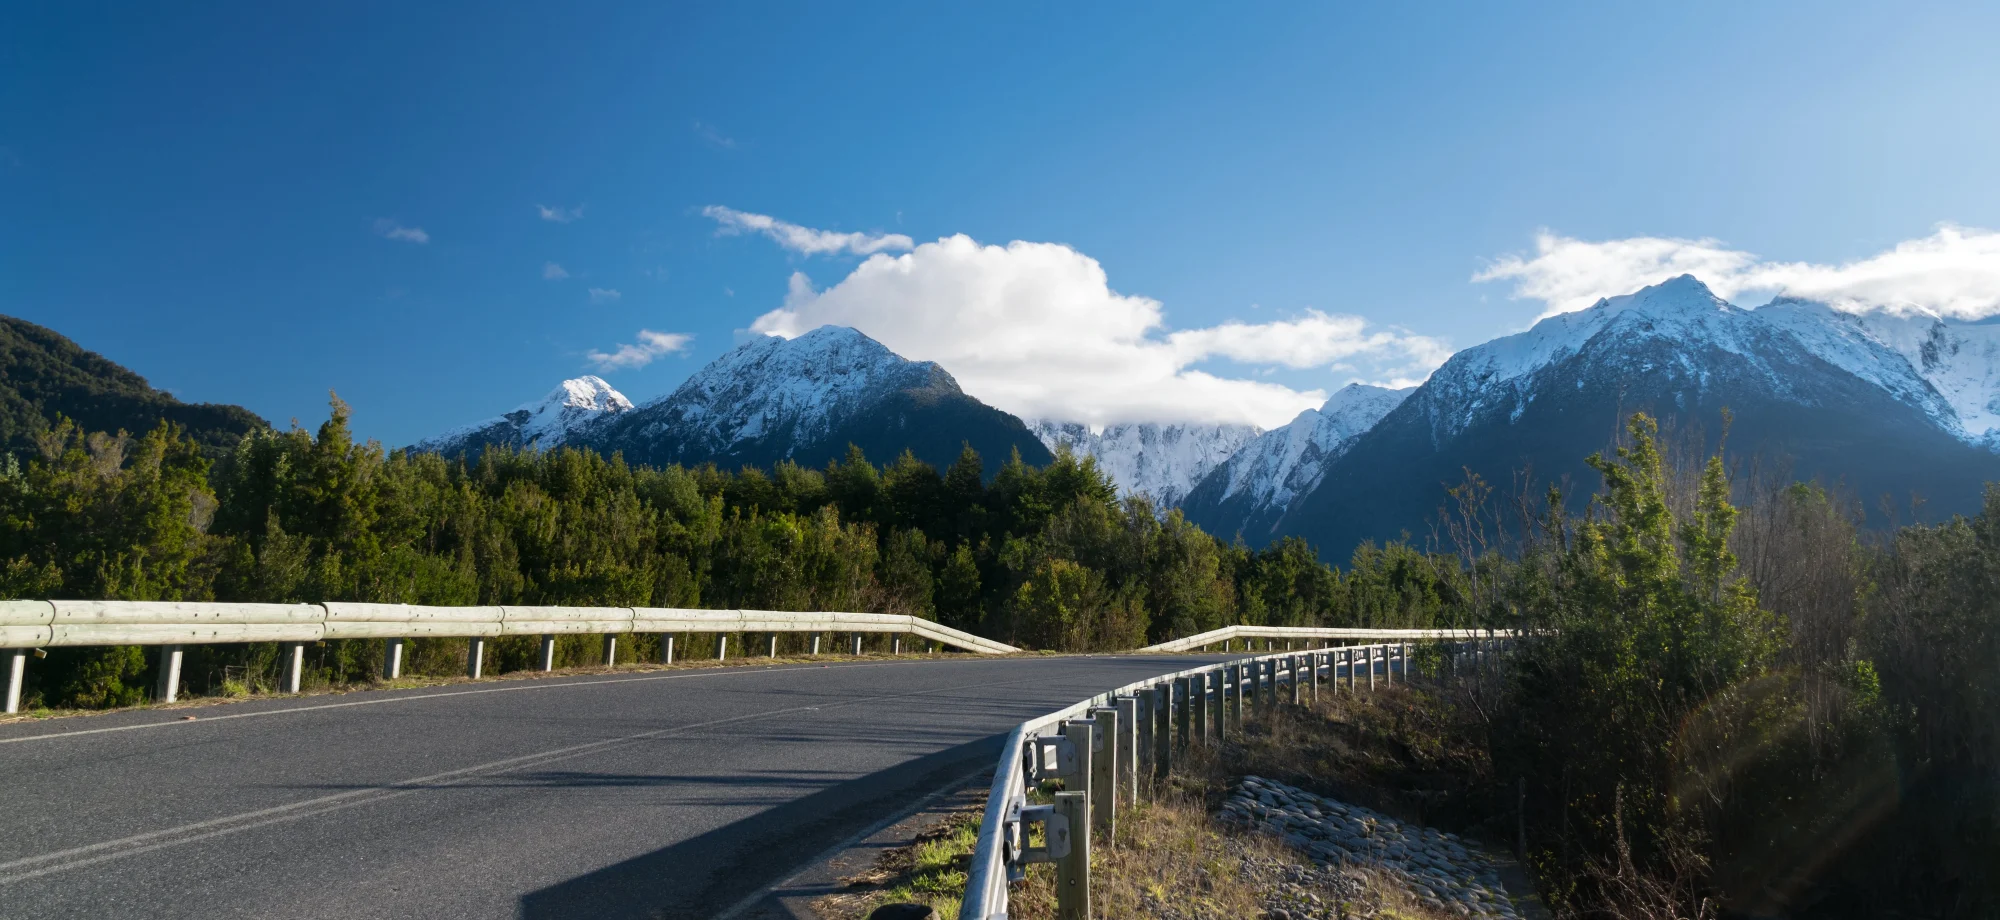 The road in Carretera Austral passes snow-capped mountains. 